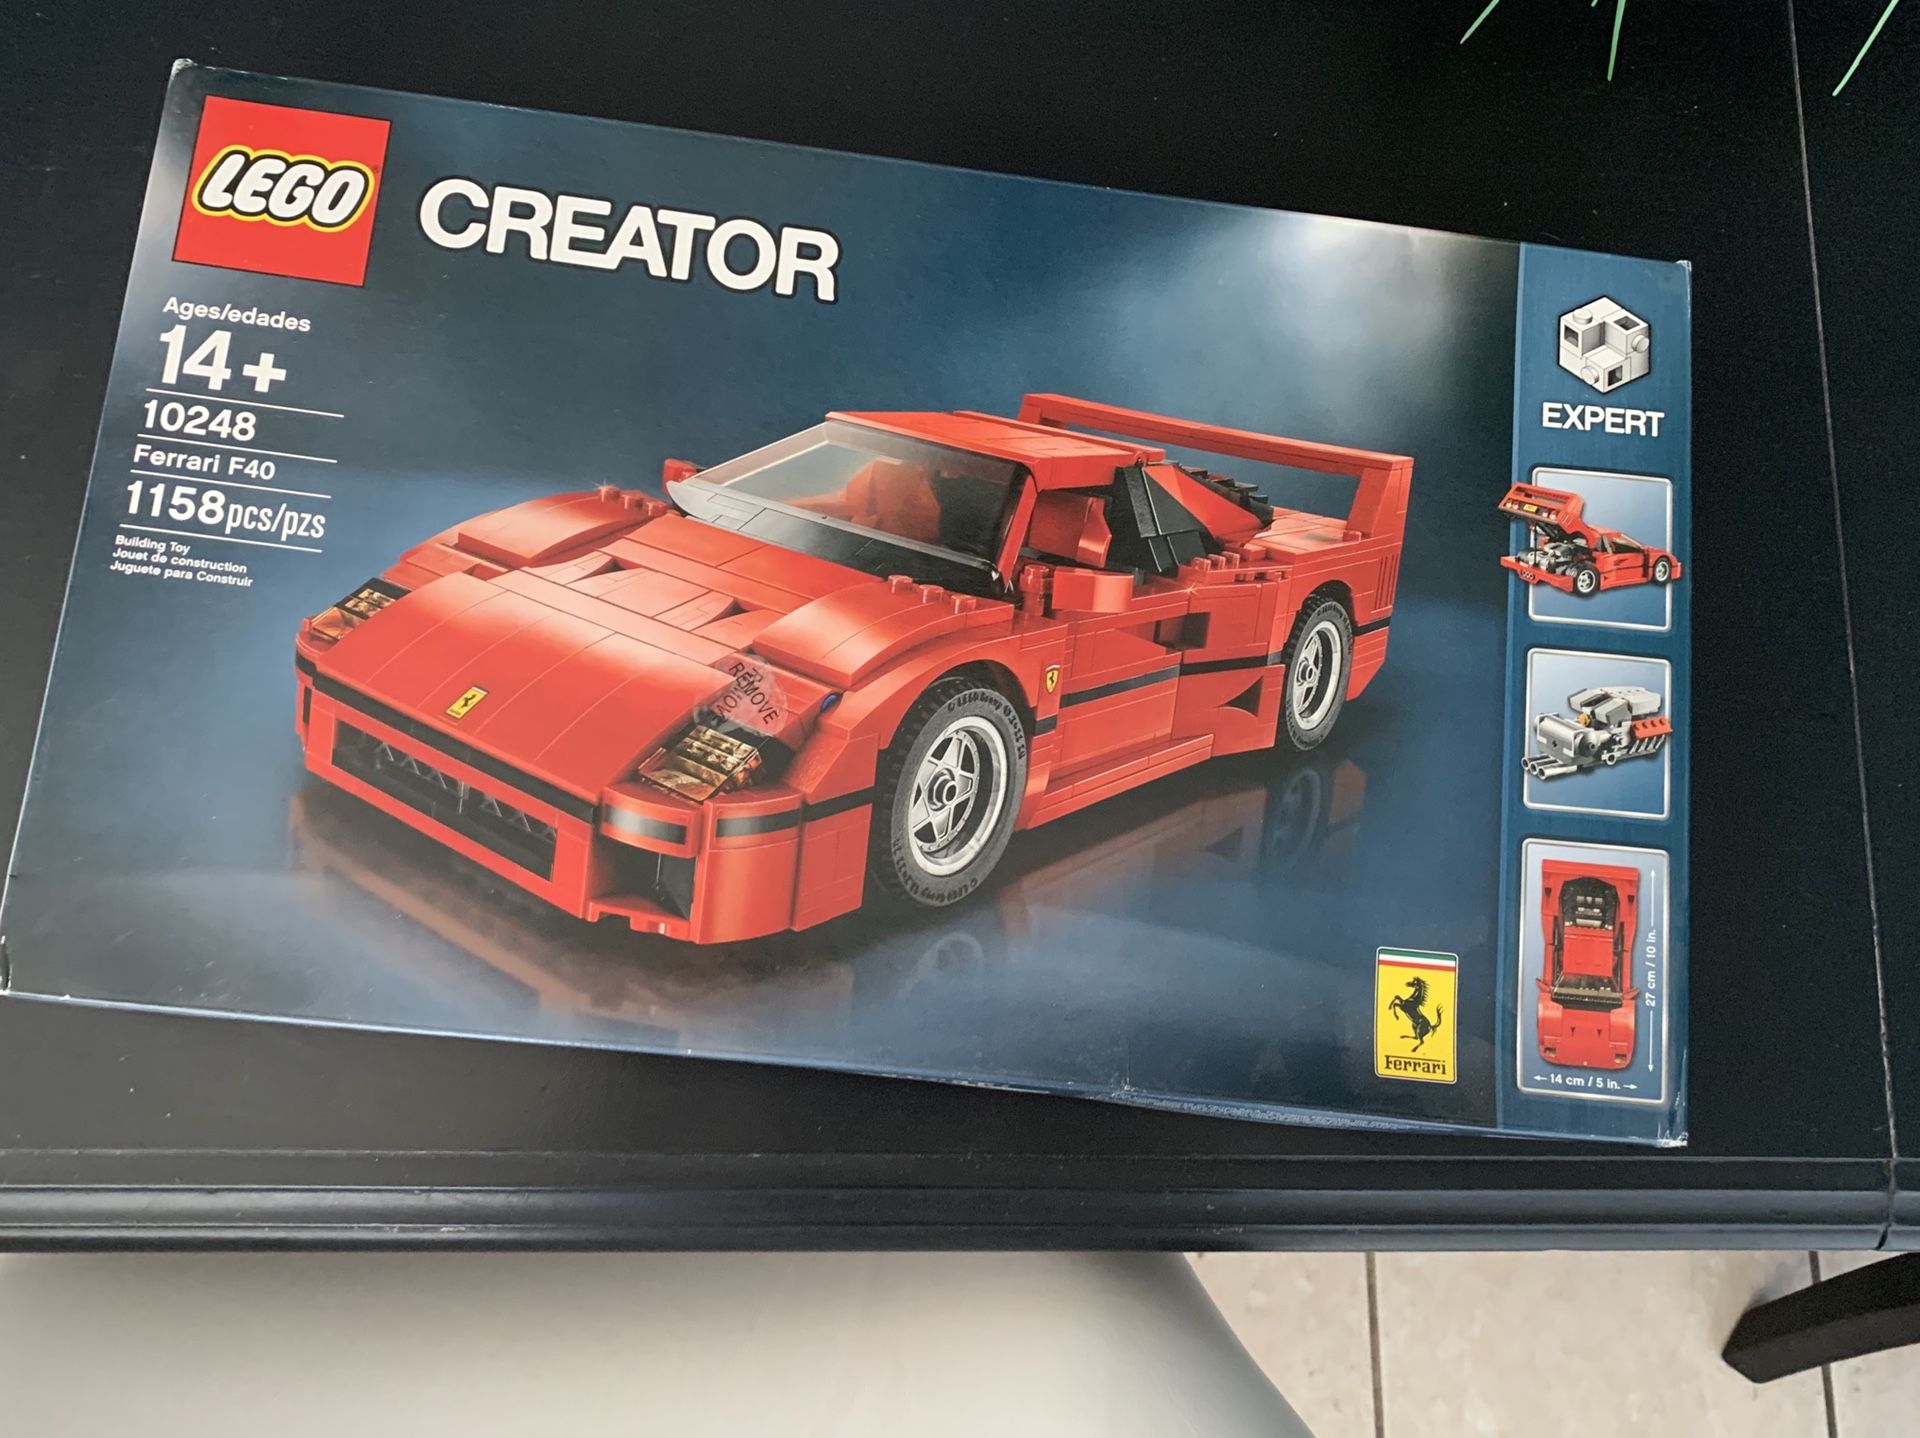 Photo LEGO F40 Ferrari, never opened and has been sitting for over a year, selling for 115 or best offer, most of these sell for up to 200 dollars and 150